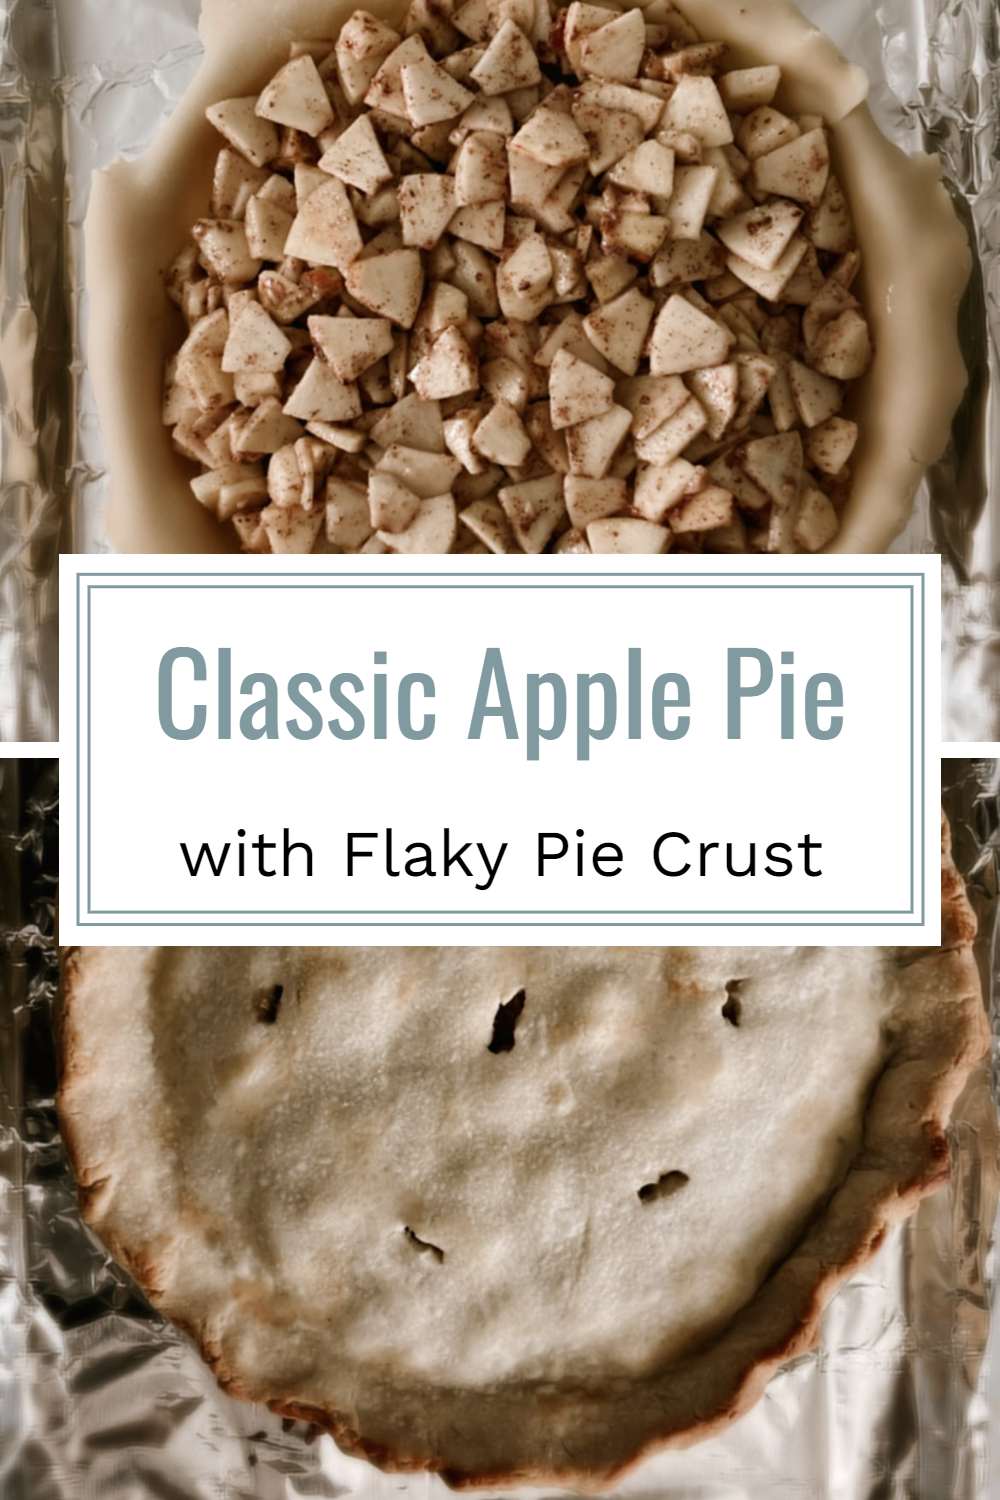 Classic Apple Pie with Flaky Pie Crust - filling & baked pie